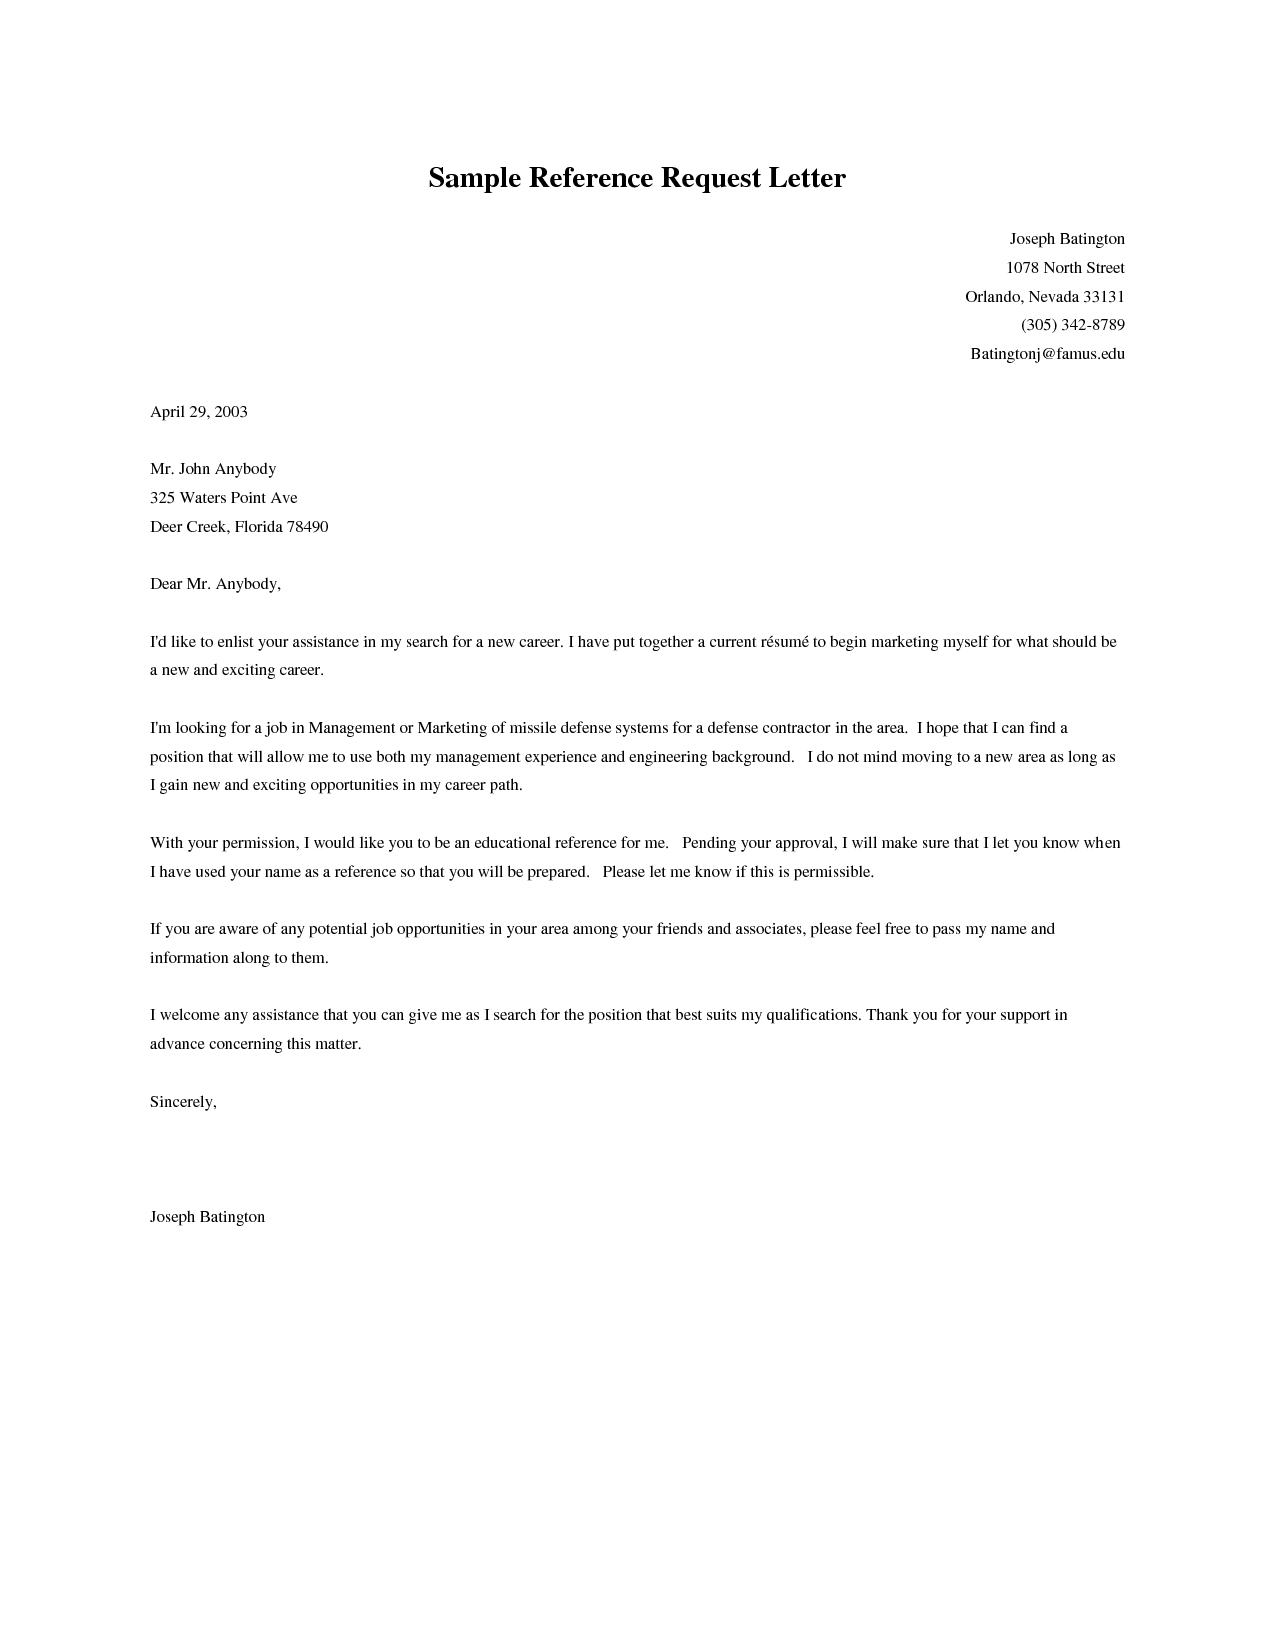 Cover Letter For Recommendation Request Debandje for measurements 1275 X 1650